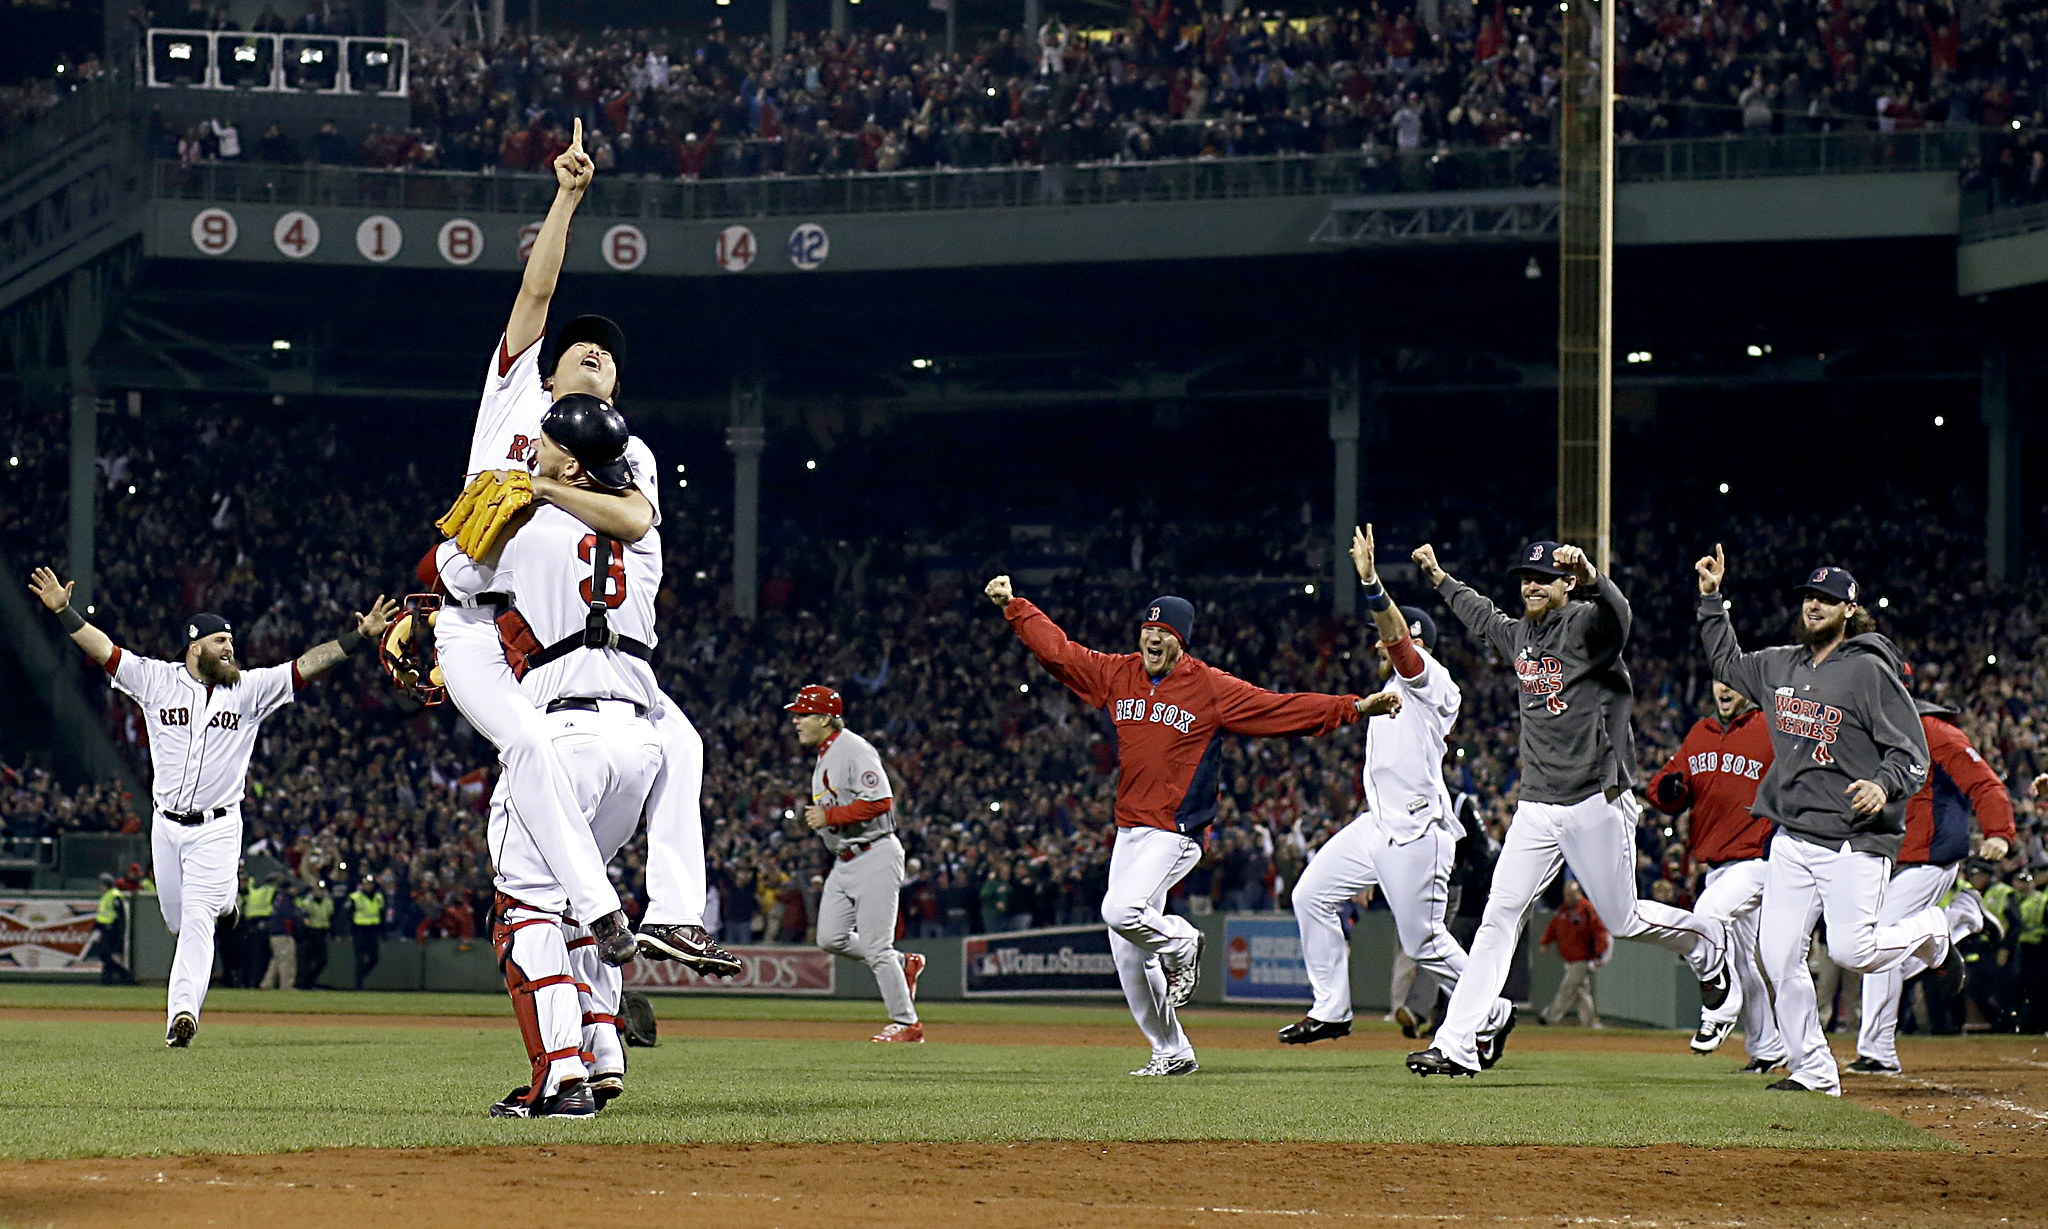 Red Sox World Series Wallpaper 2013 Images Pictures   Becuo